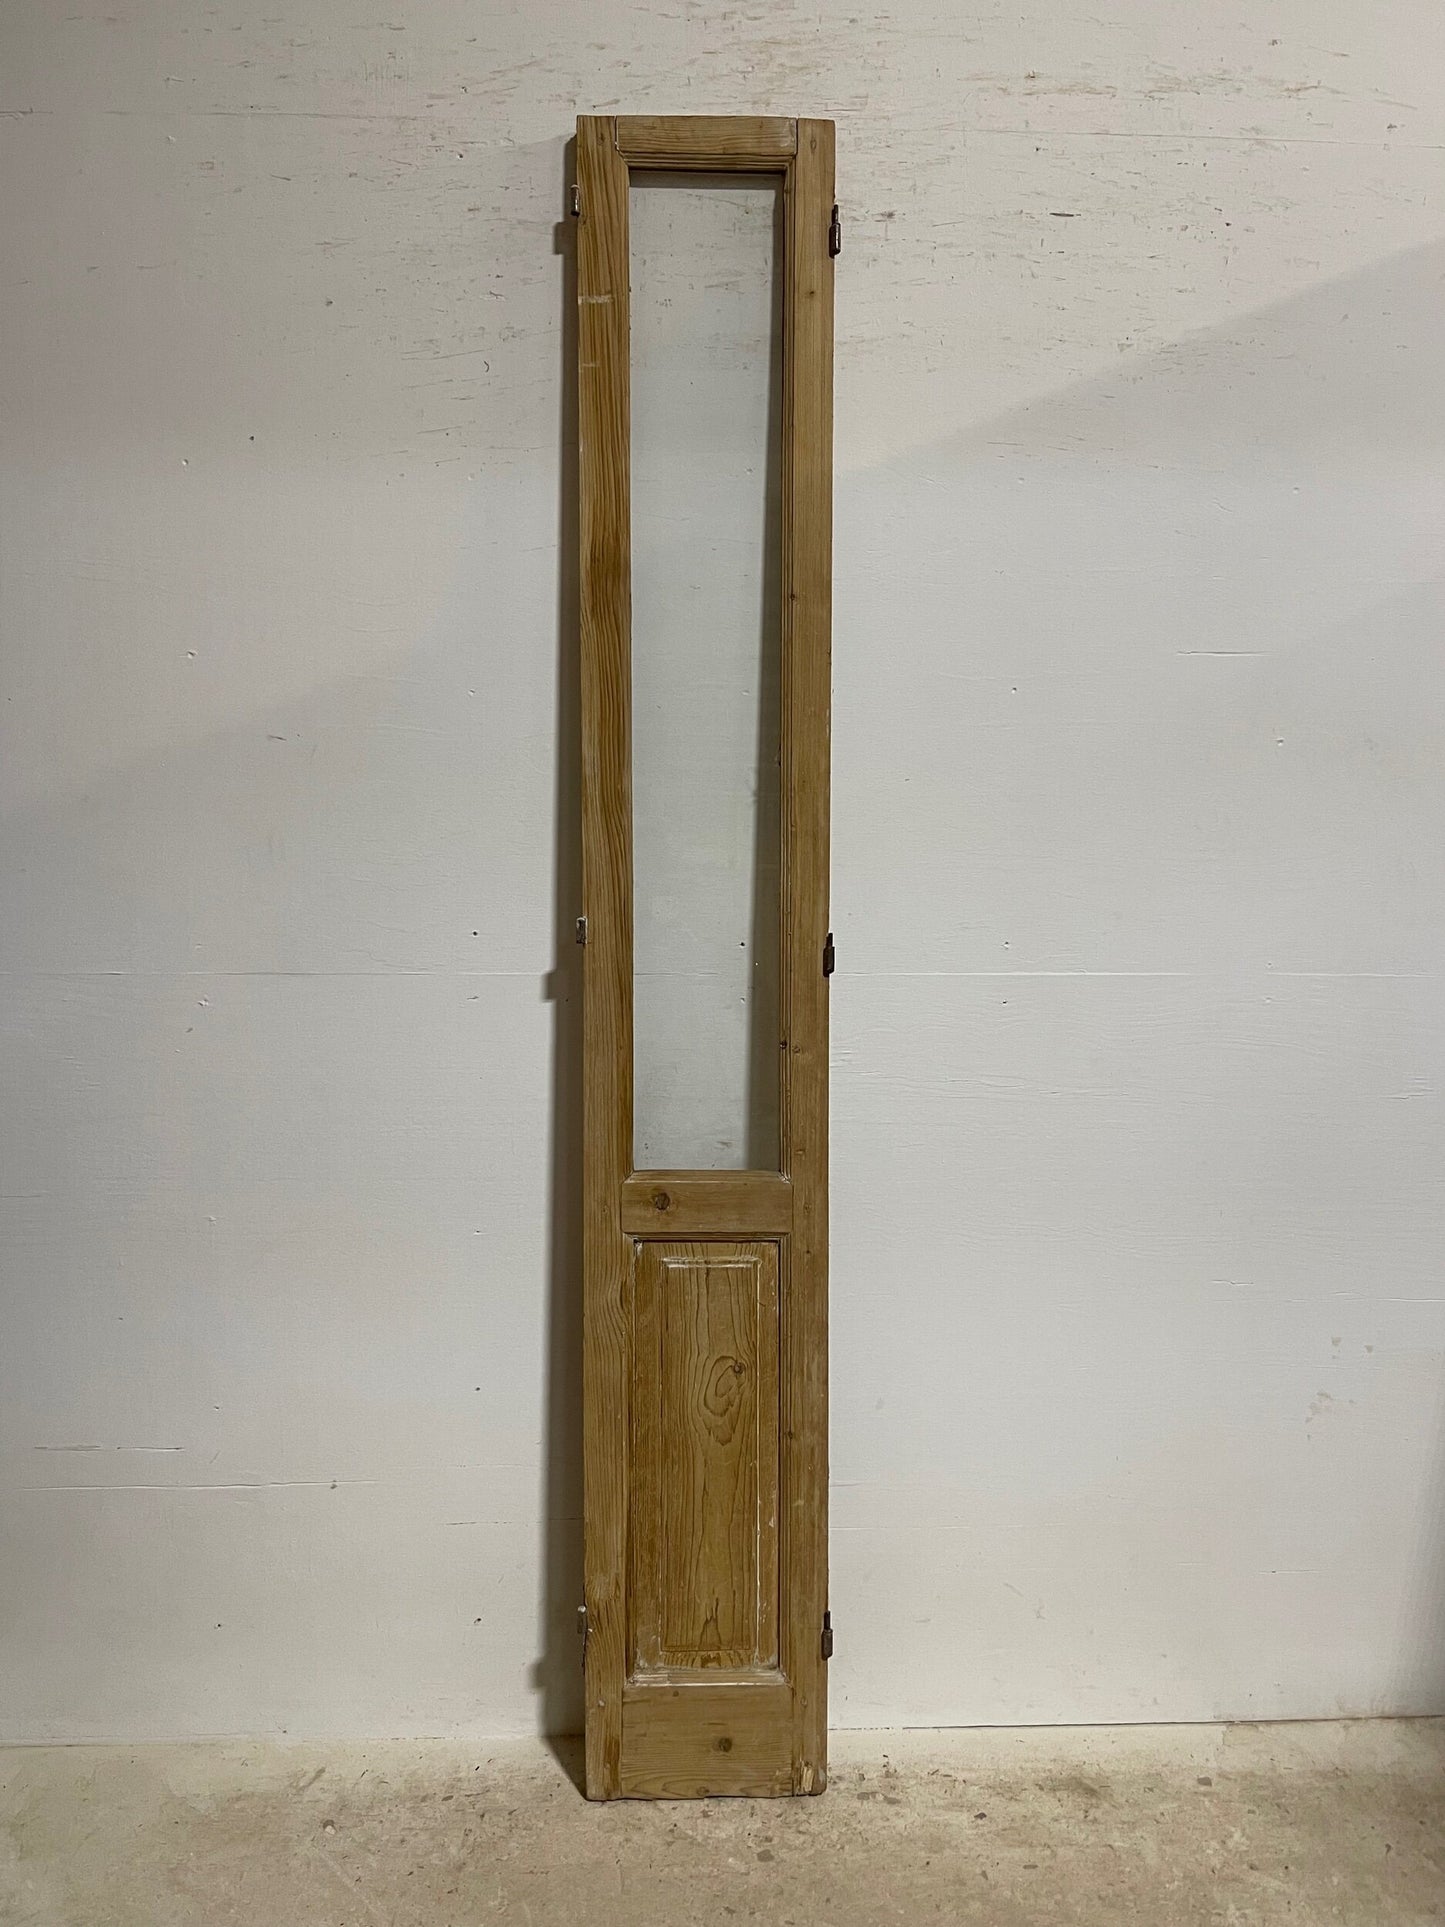 Antique French door with glass (95.5x14.25) H0270s